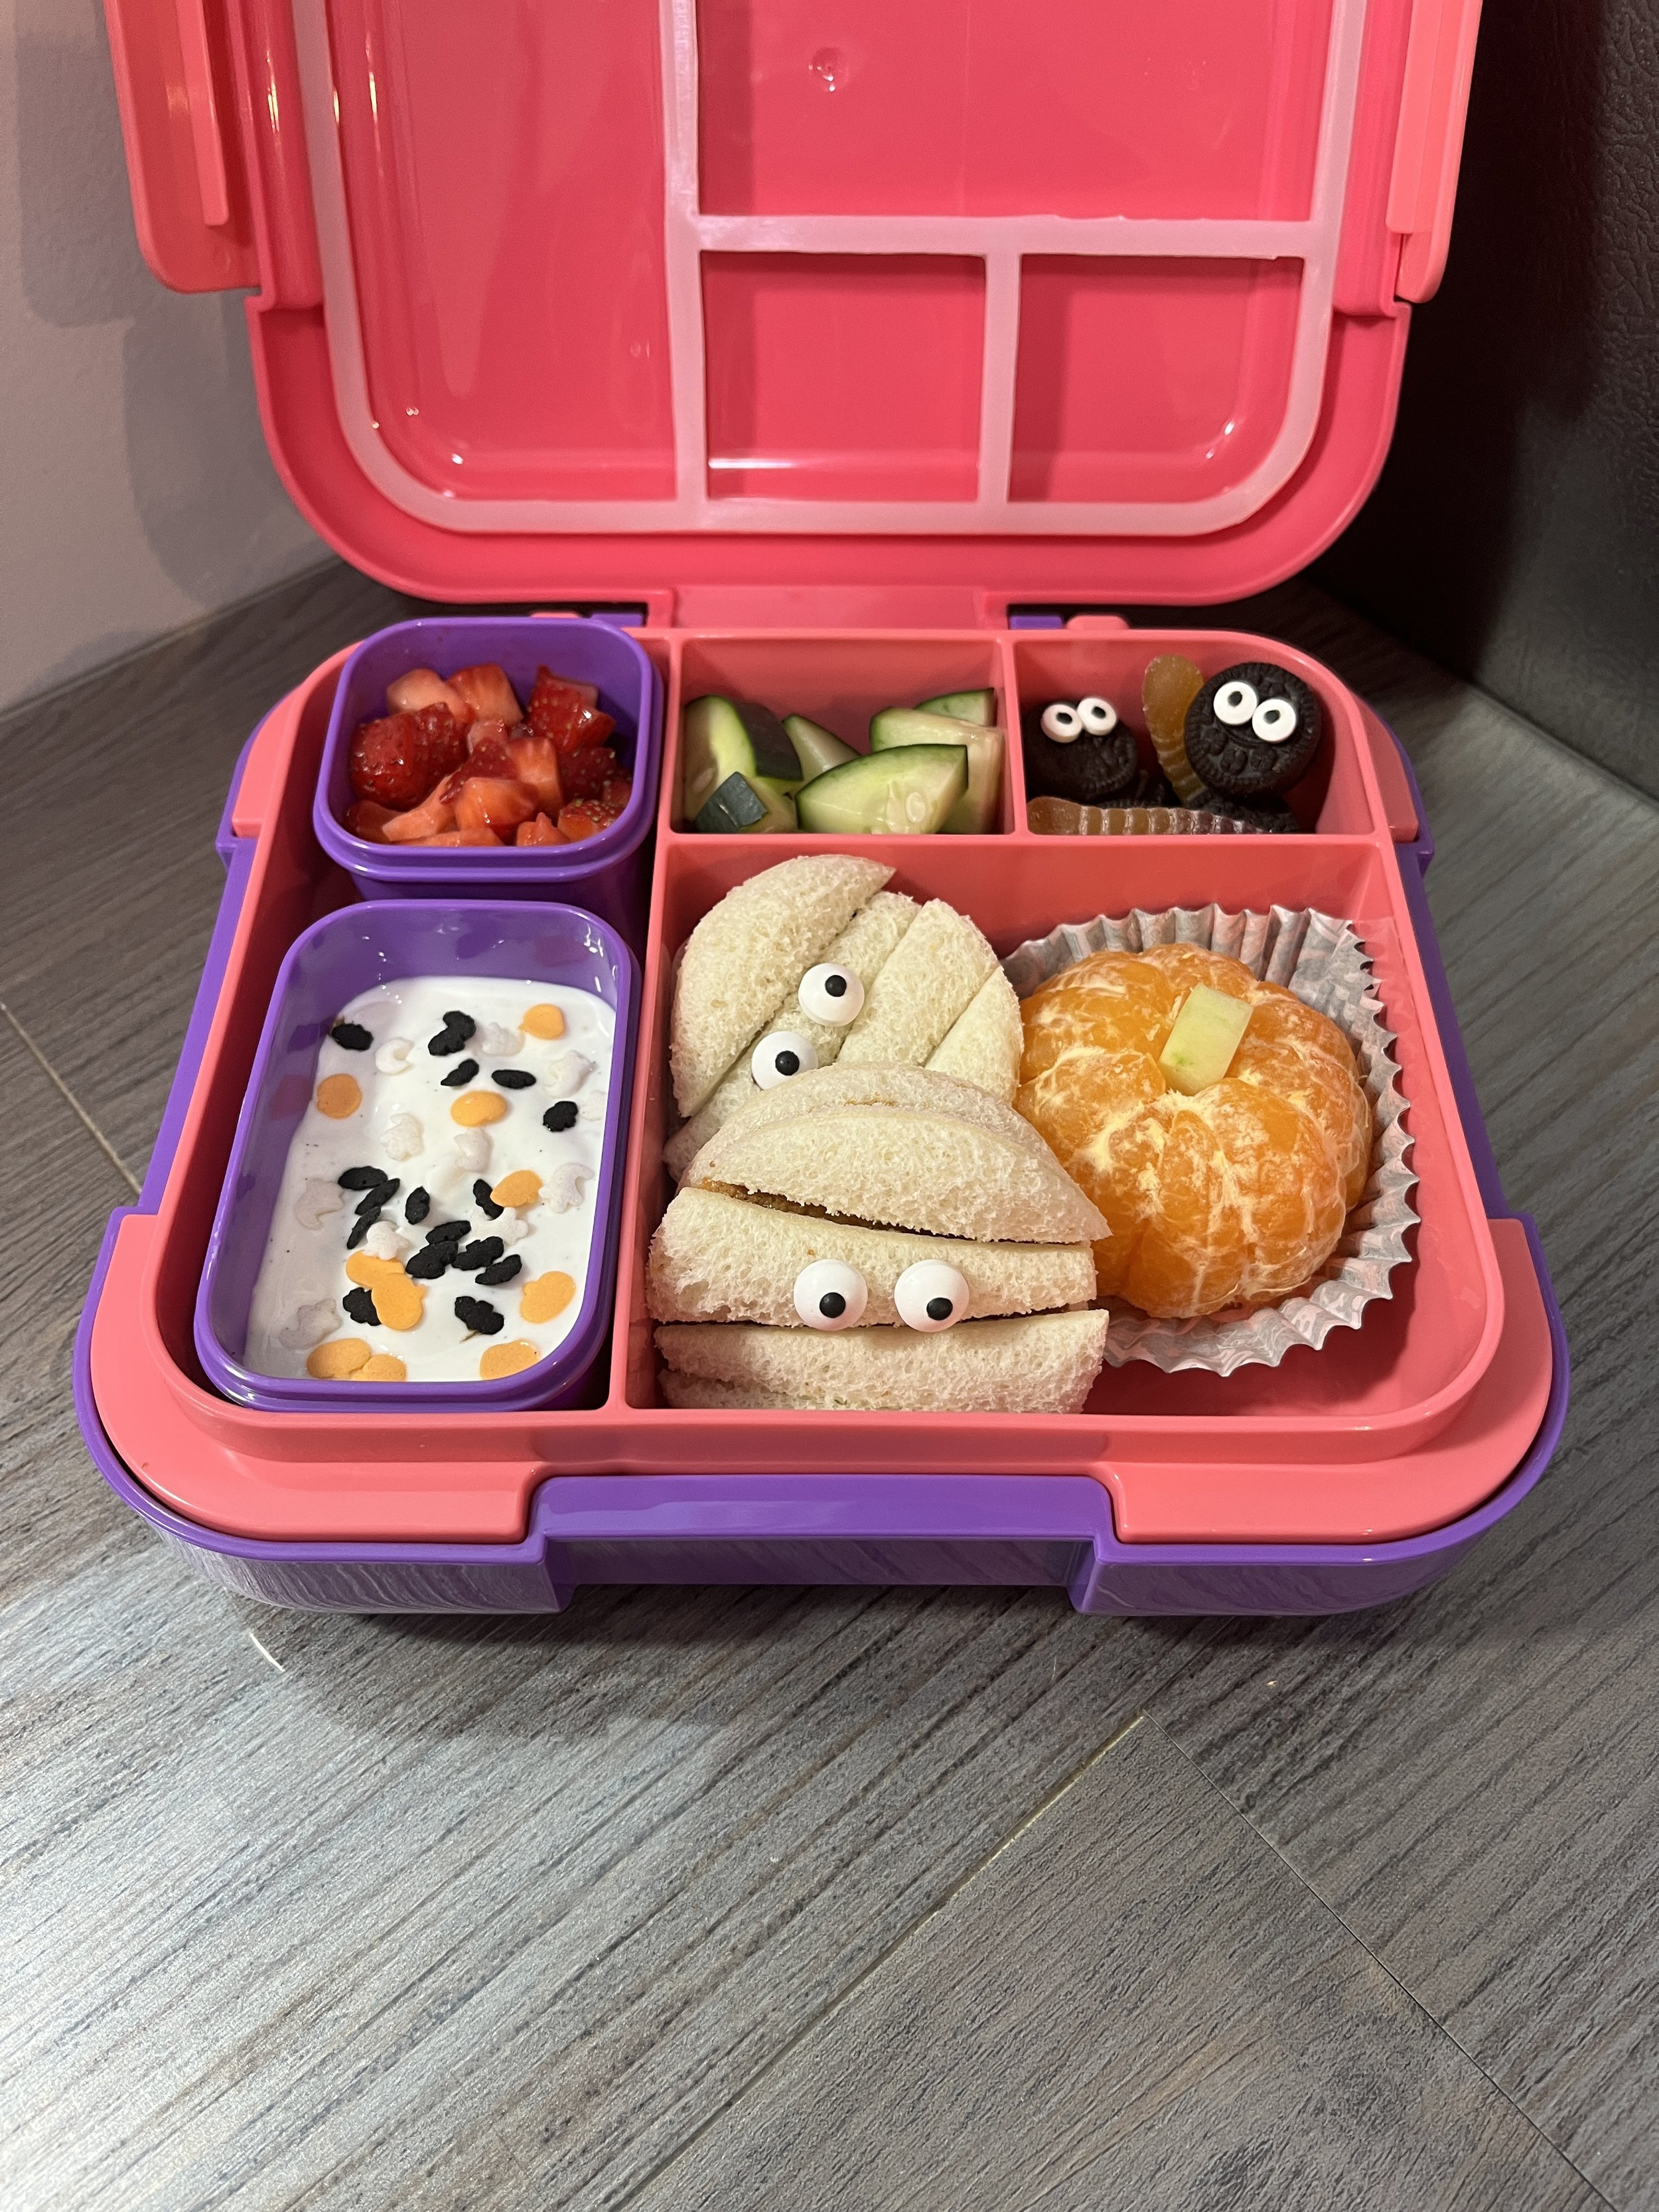 👻 Let’s Get Ready For Halloween - Halloween Bento Box 👻 | NEW Caperci Bento Box Review